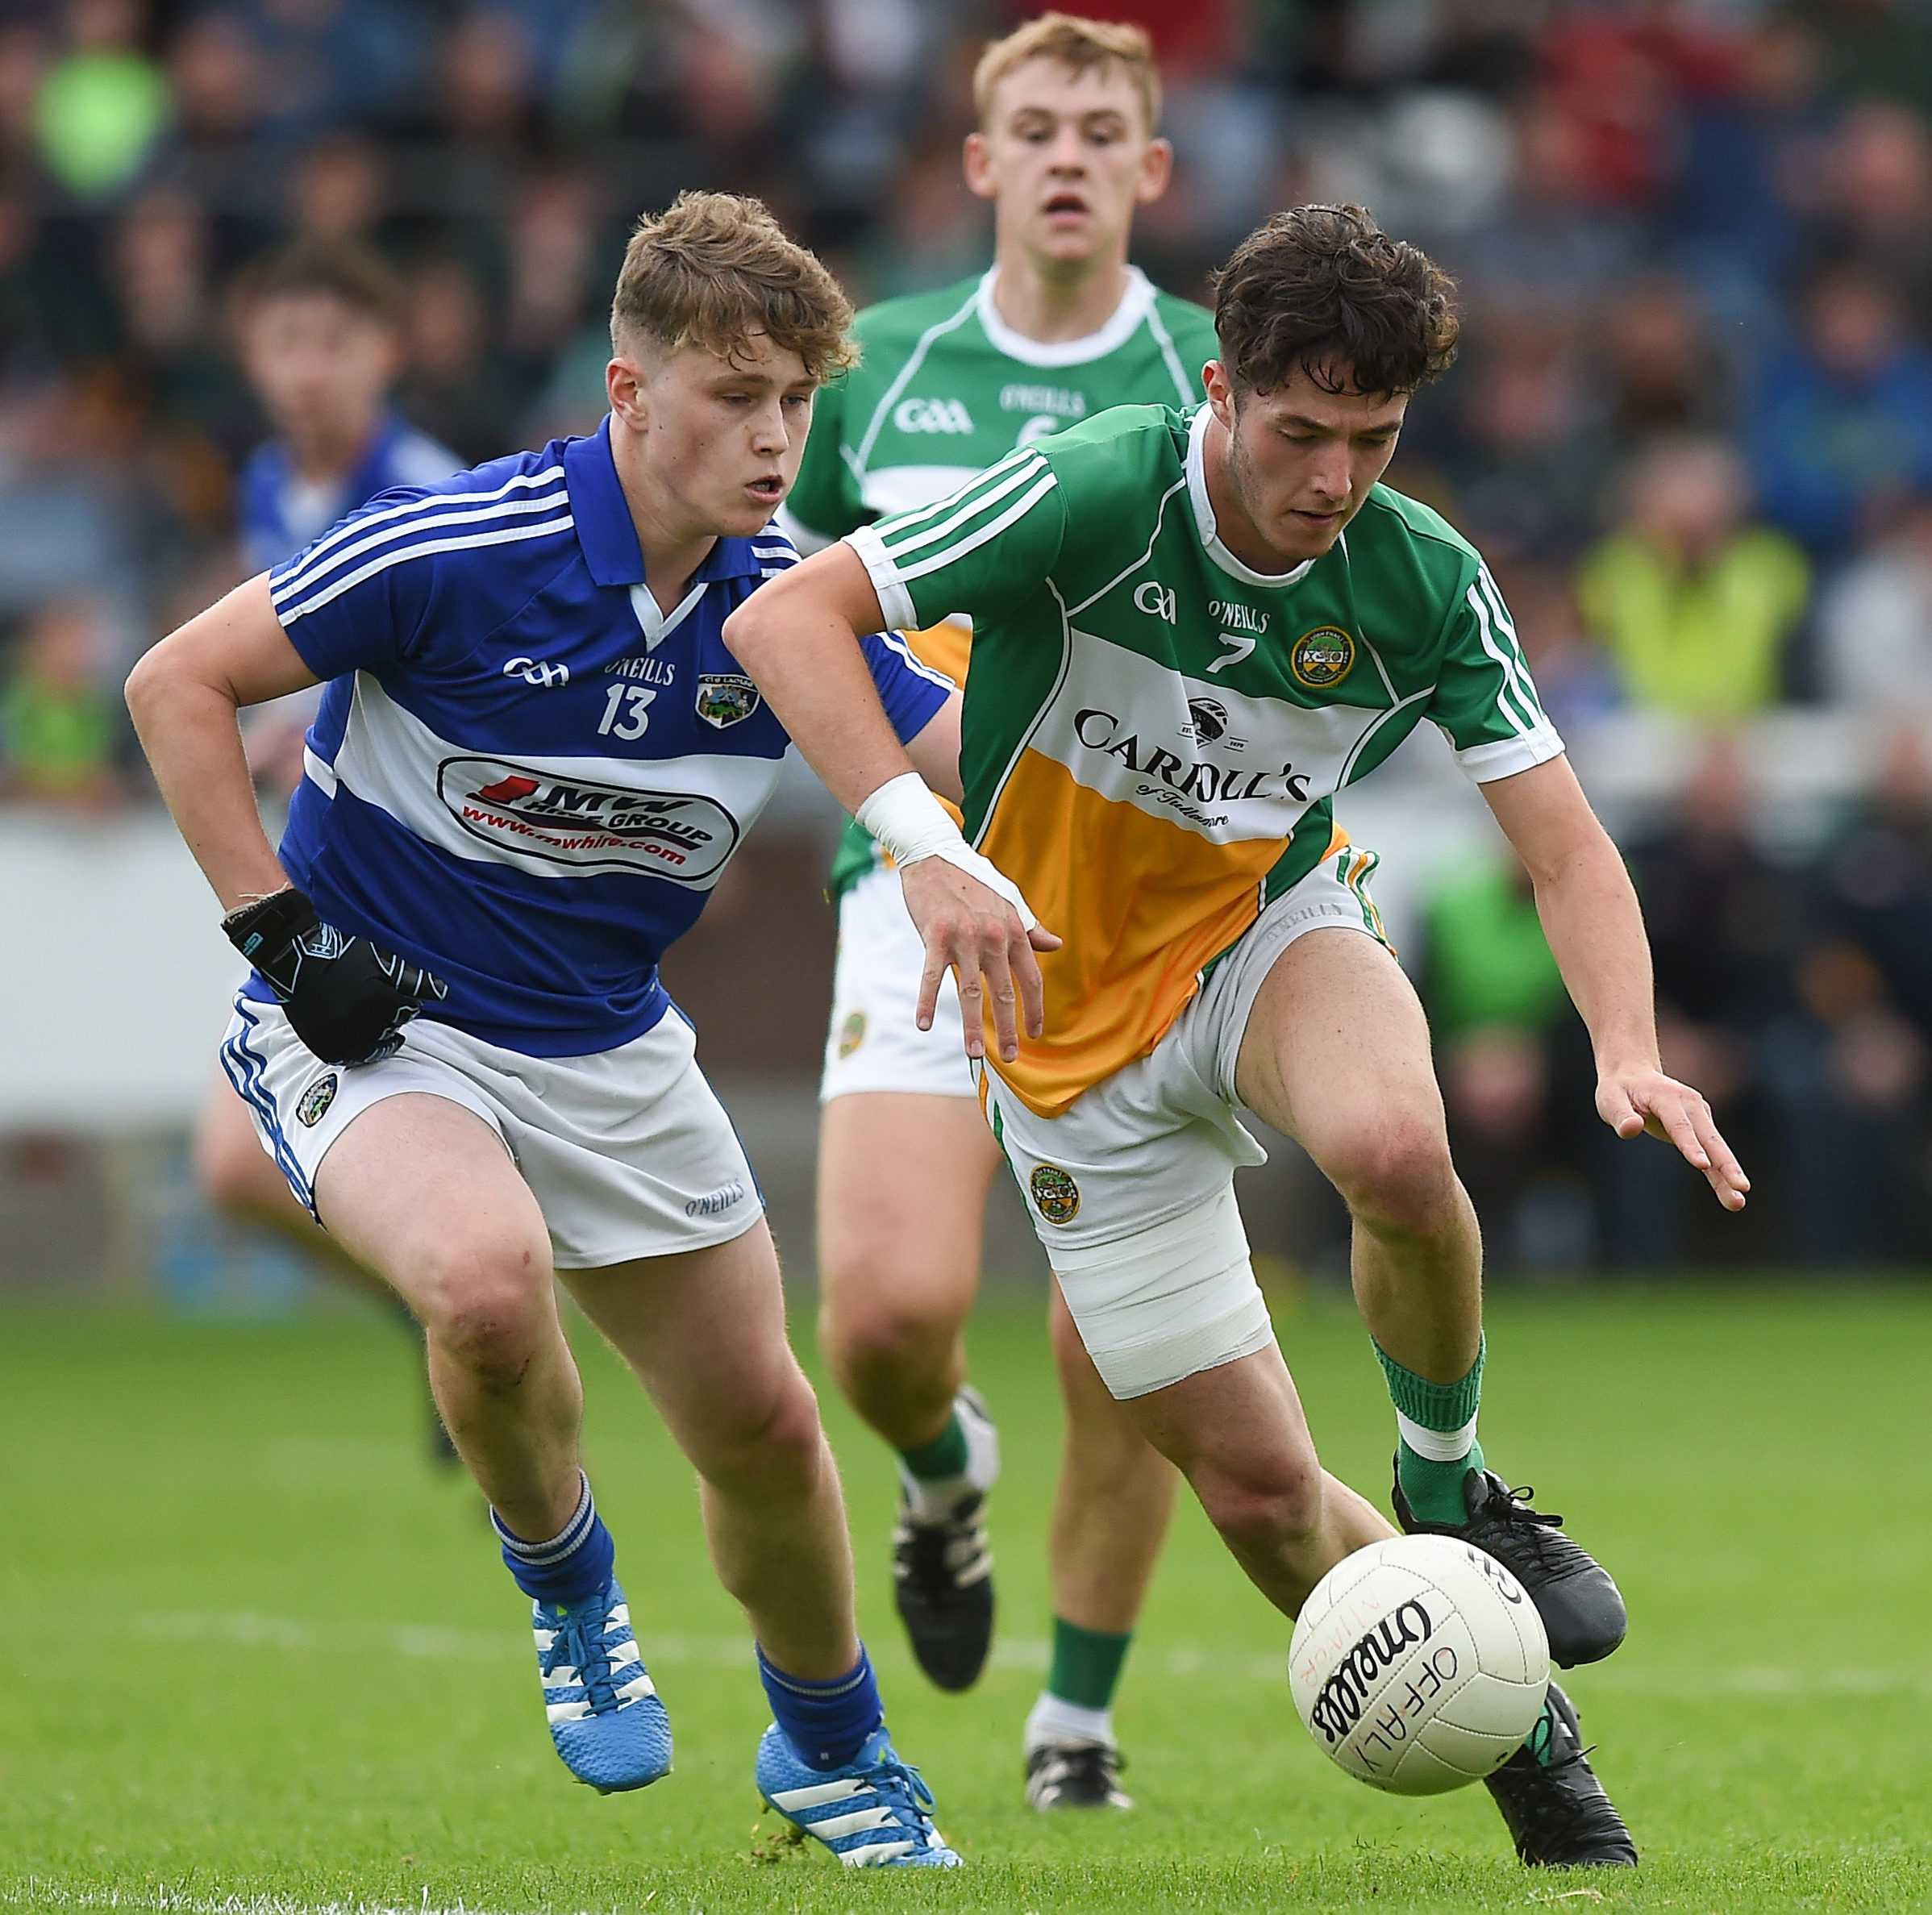 Johnny Kelly in action for Laois during the Leinster Football Minor Championship Semi-Final match between Laois and Offaly